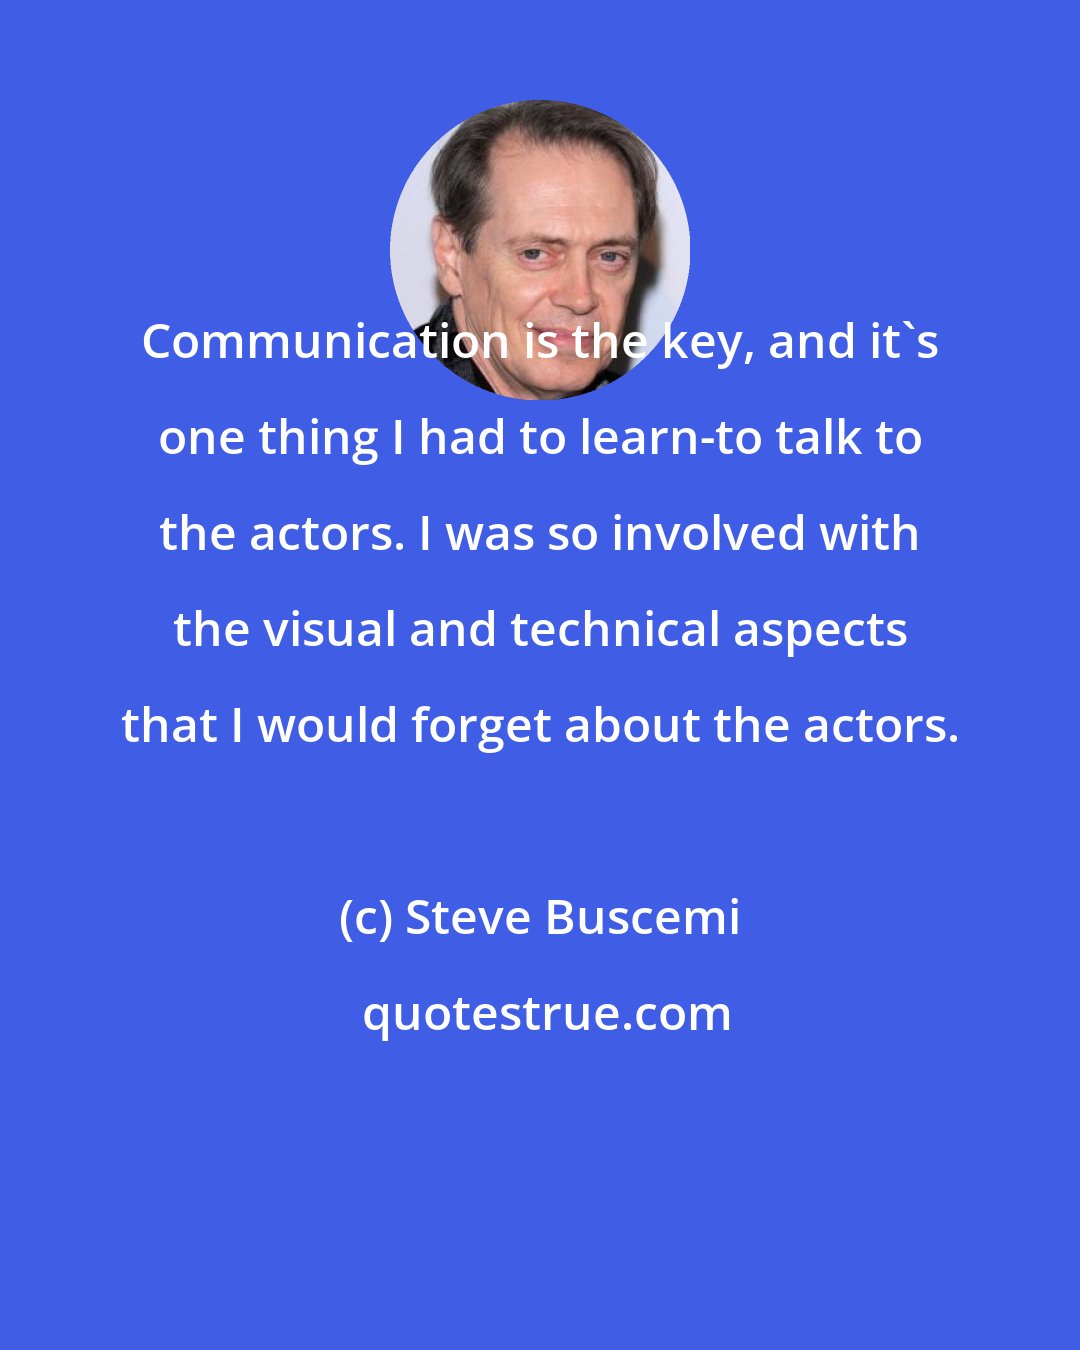 Steve Buscemi: Communication is the key, and it's one thing I had to learn-to talk to the actors. I was so involved with the visual and technical aspects that I would forget about the actors.